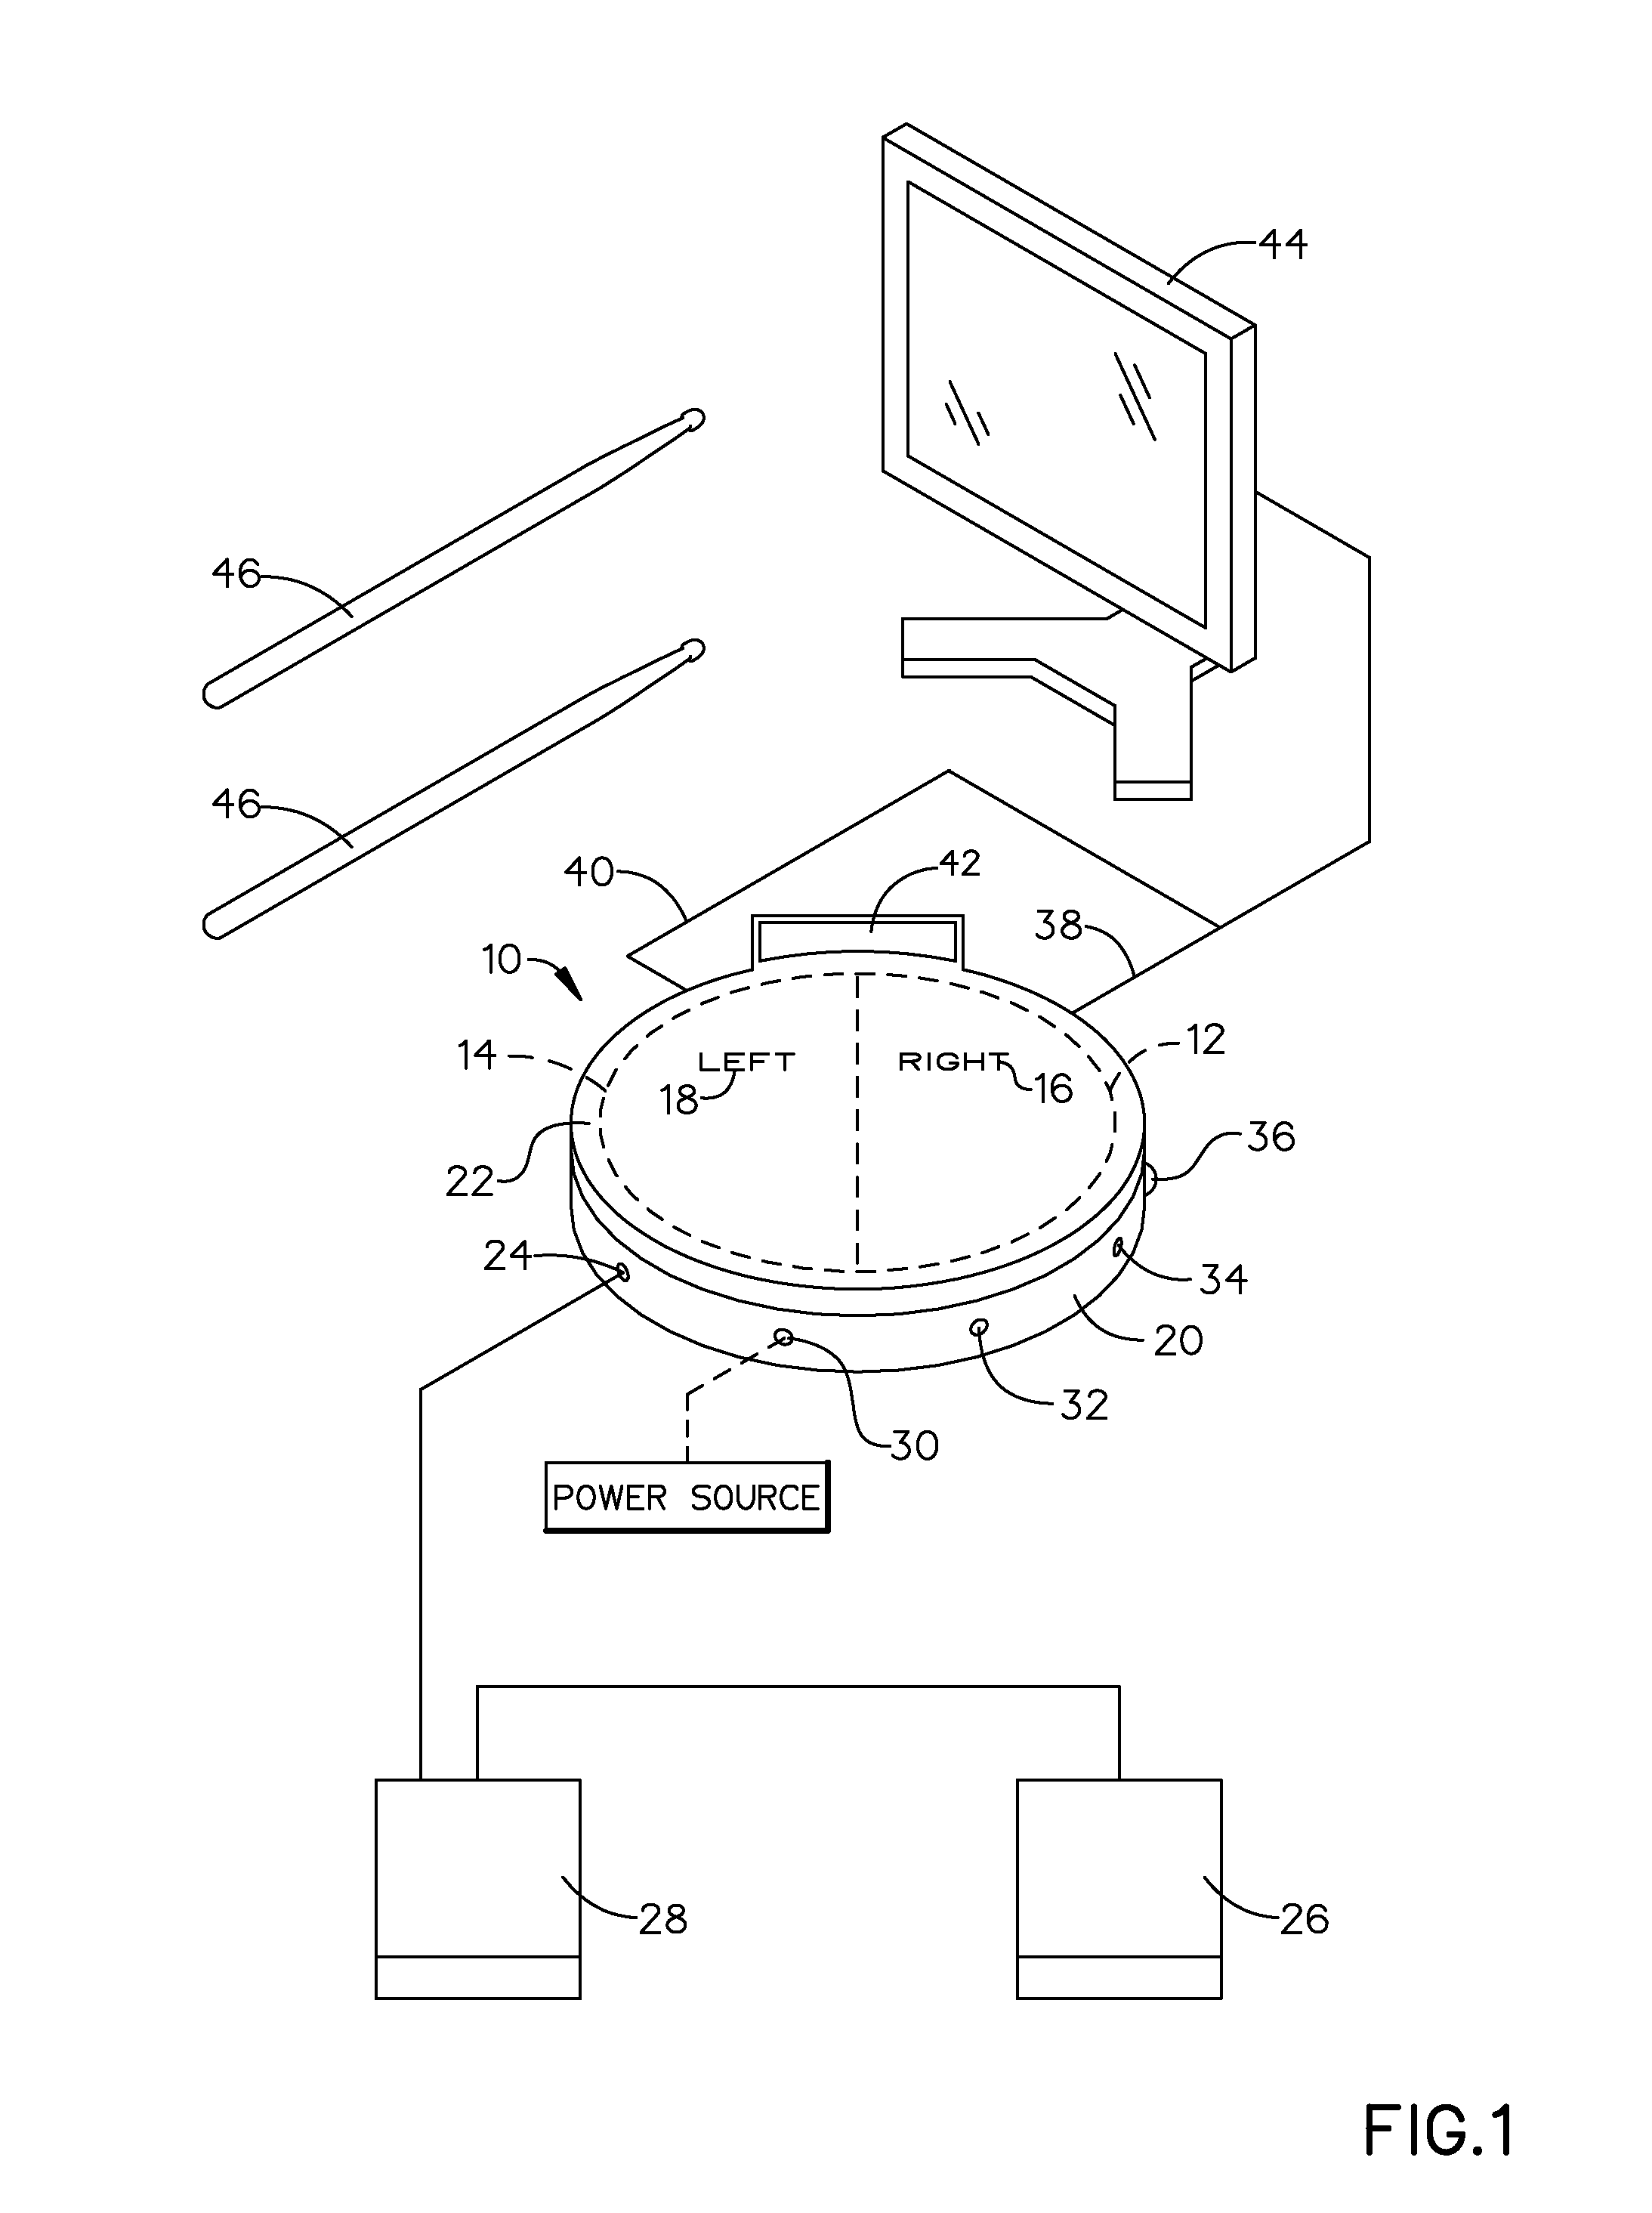 Electronic percussion device for determining separate right and left hand actions